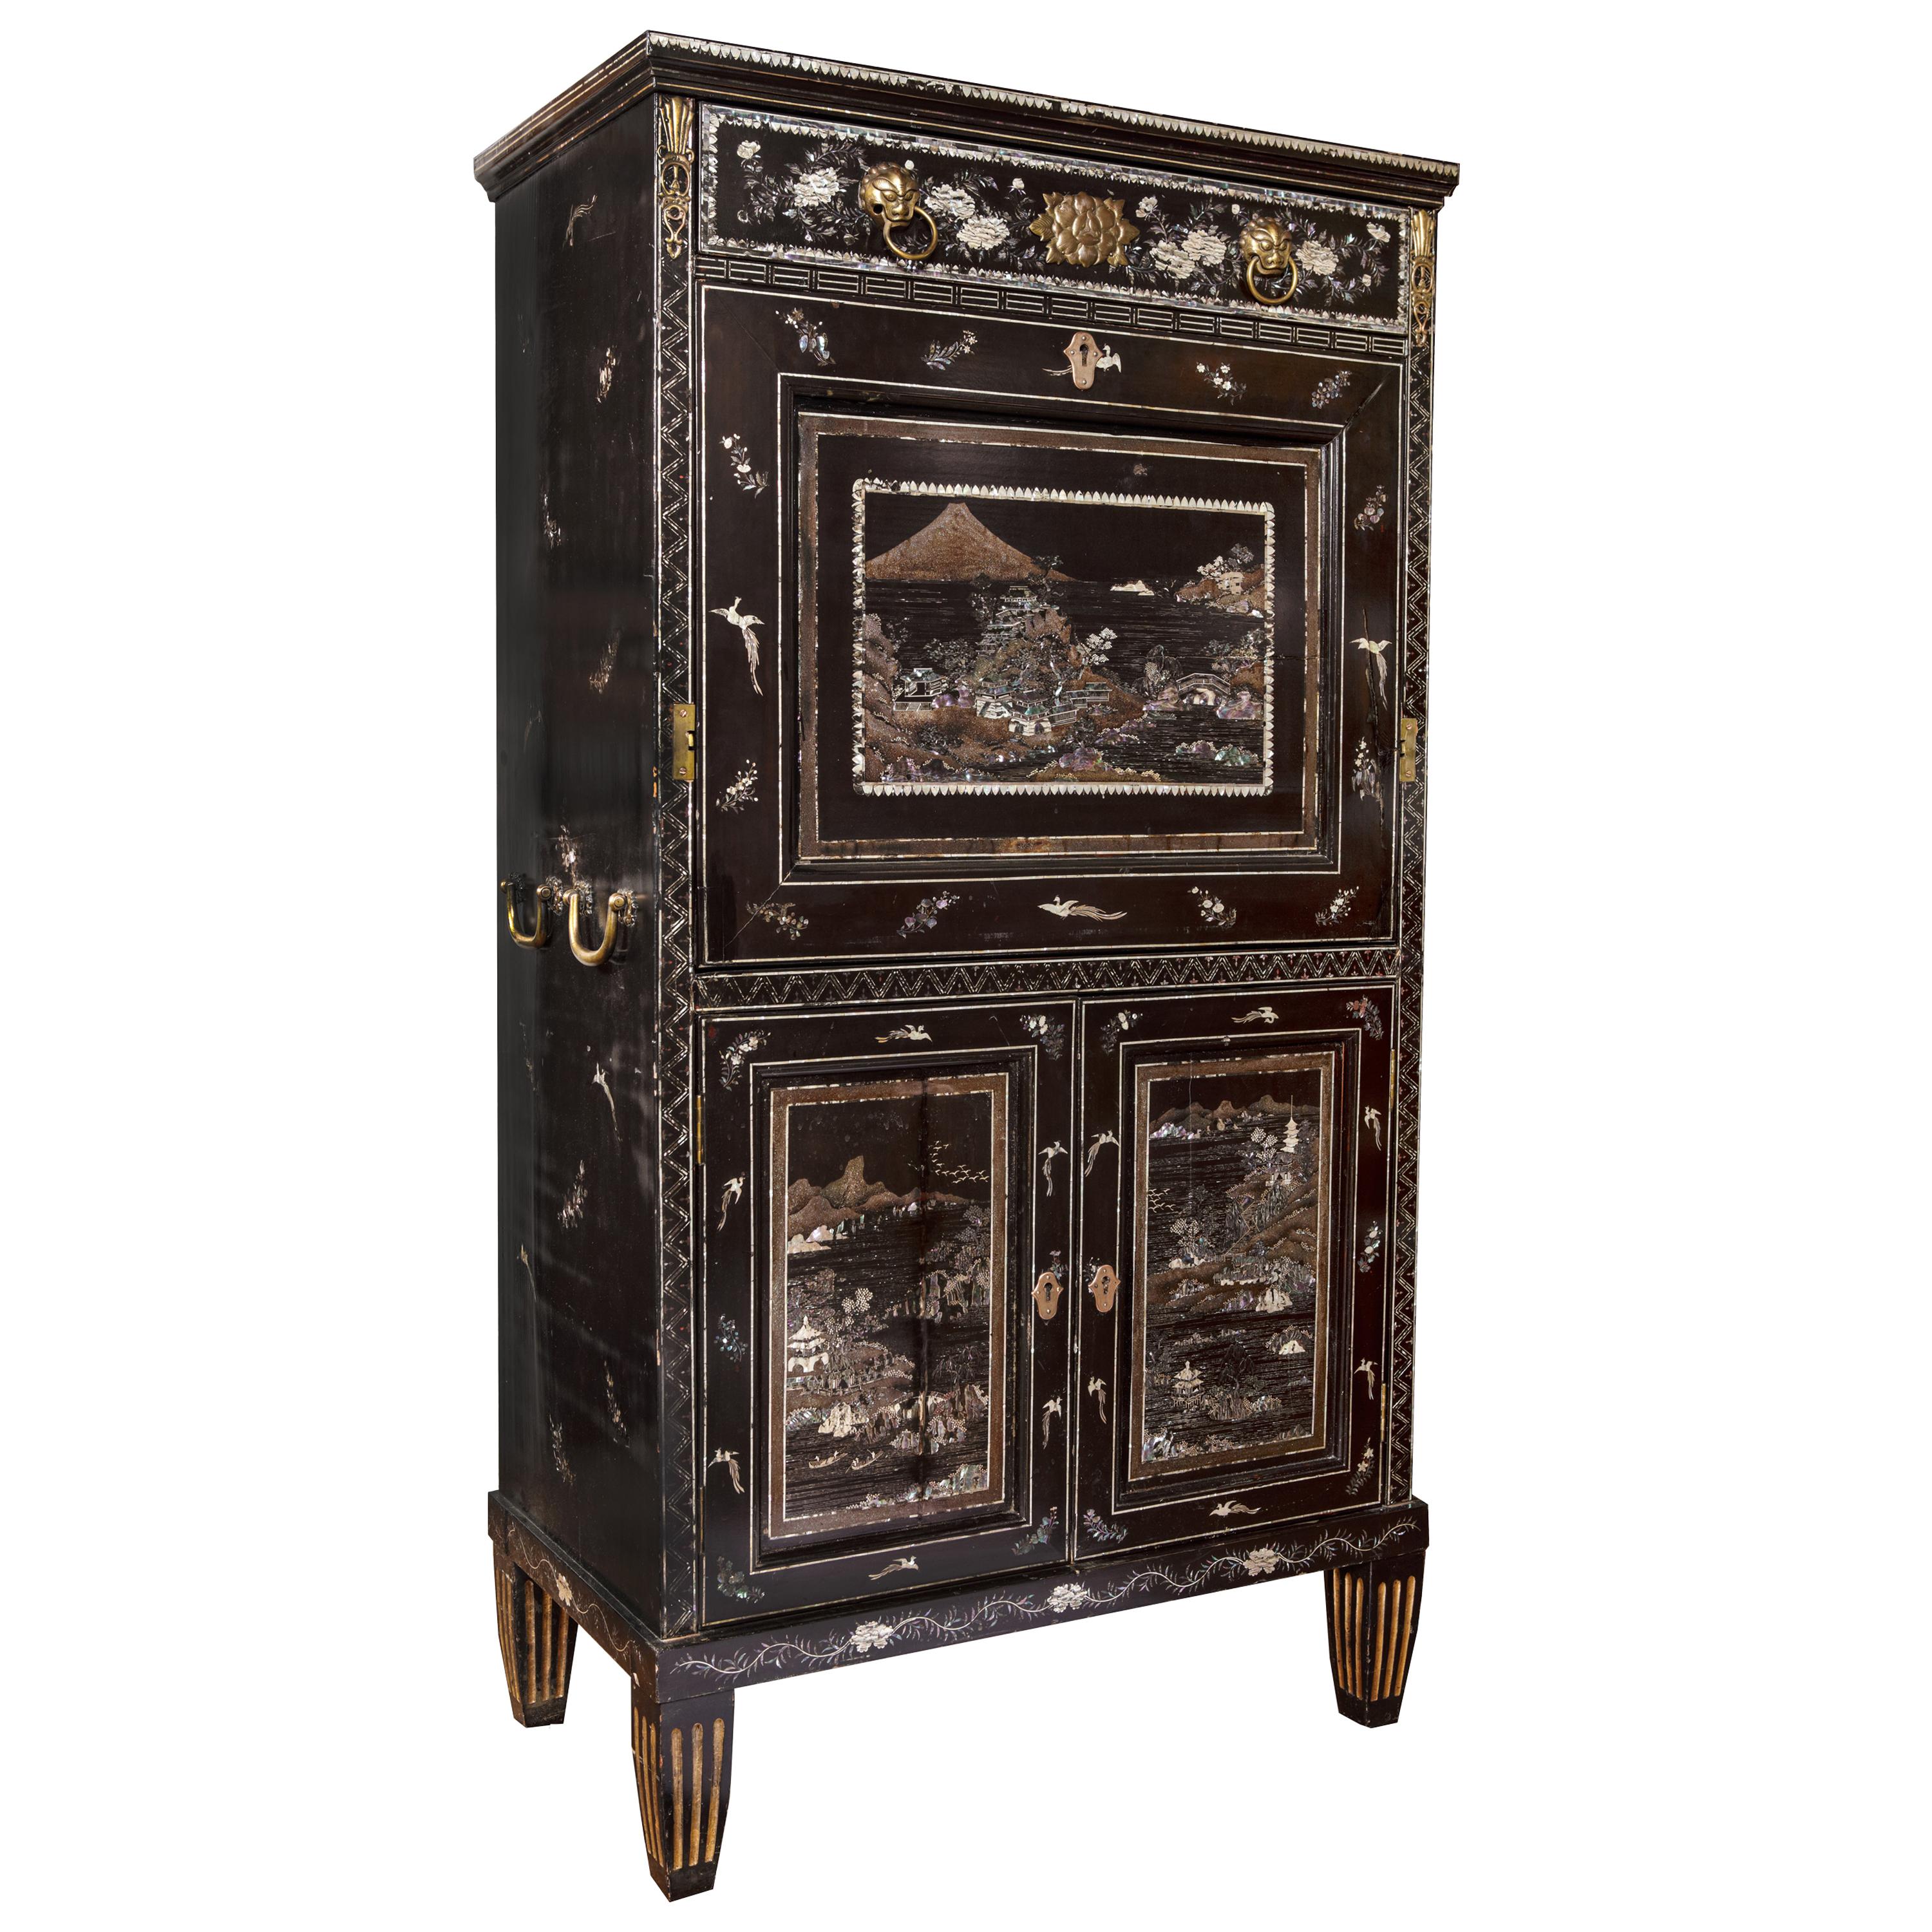 Japanese Export Lacquer Mother-of-Pearl Secretaire for the American Market For Sale